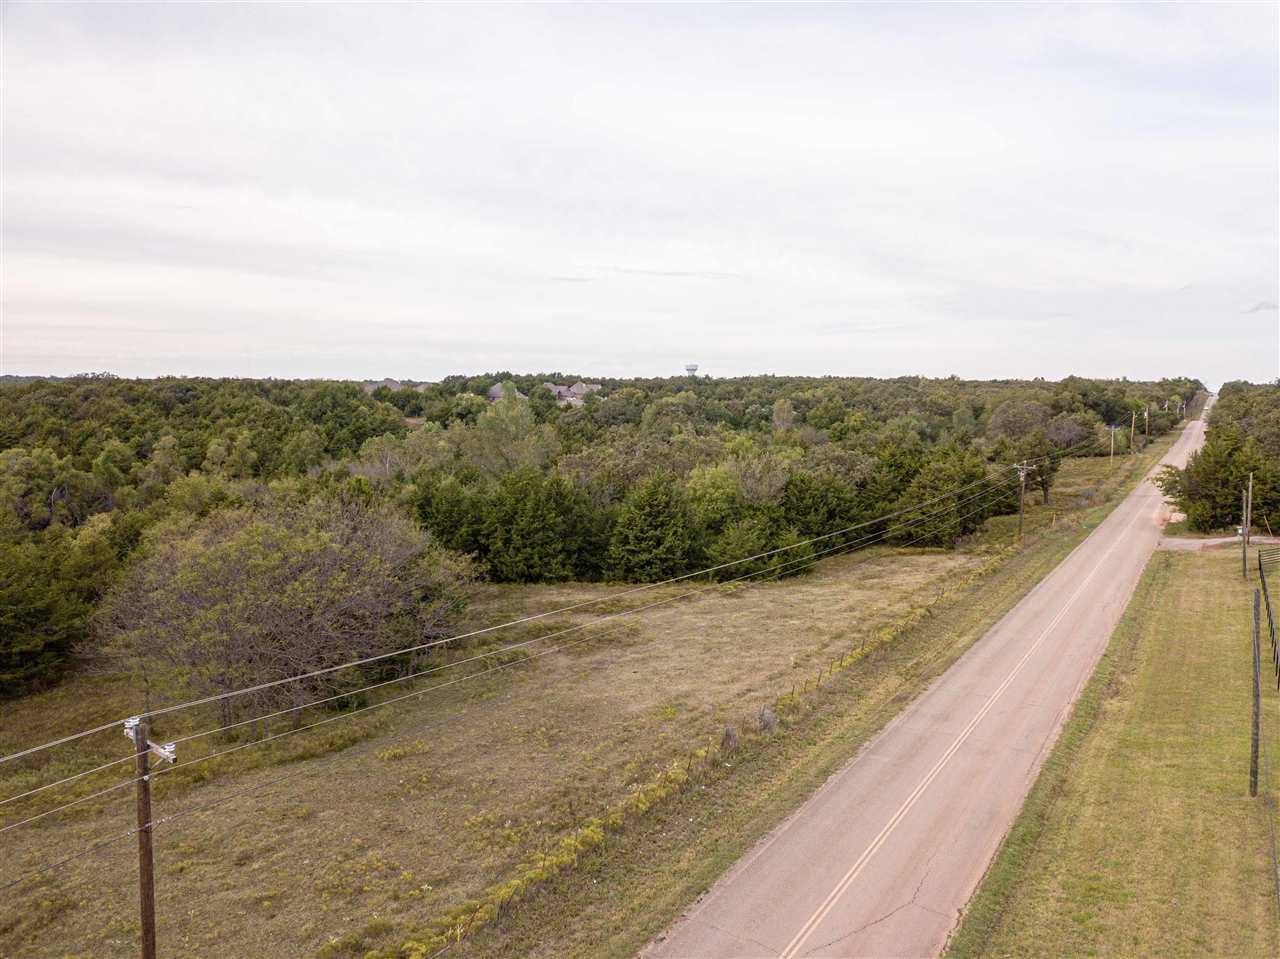 Location, location, location. This fantastic 35.52 acres now available with endless possibilities for this piece of land and pave road access in SW Stillwater. Whether you want to build, have a place for cattle/horses or just enjoy having land, do not miss your opportunity. This property is located on S Country Club Road, between 44th and 56th, south of Red Rose Valley. Stillwater Schools District. The property has already been surveyed with pins set. The land is a combination of pasture land and trees. 5 strand fencing on majority of property. Utilities are along Country Club Road. Call for your private showing today!